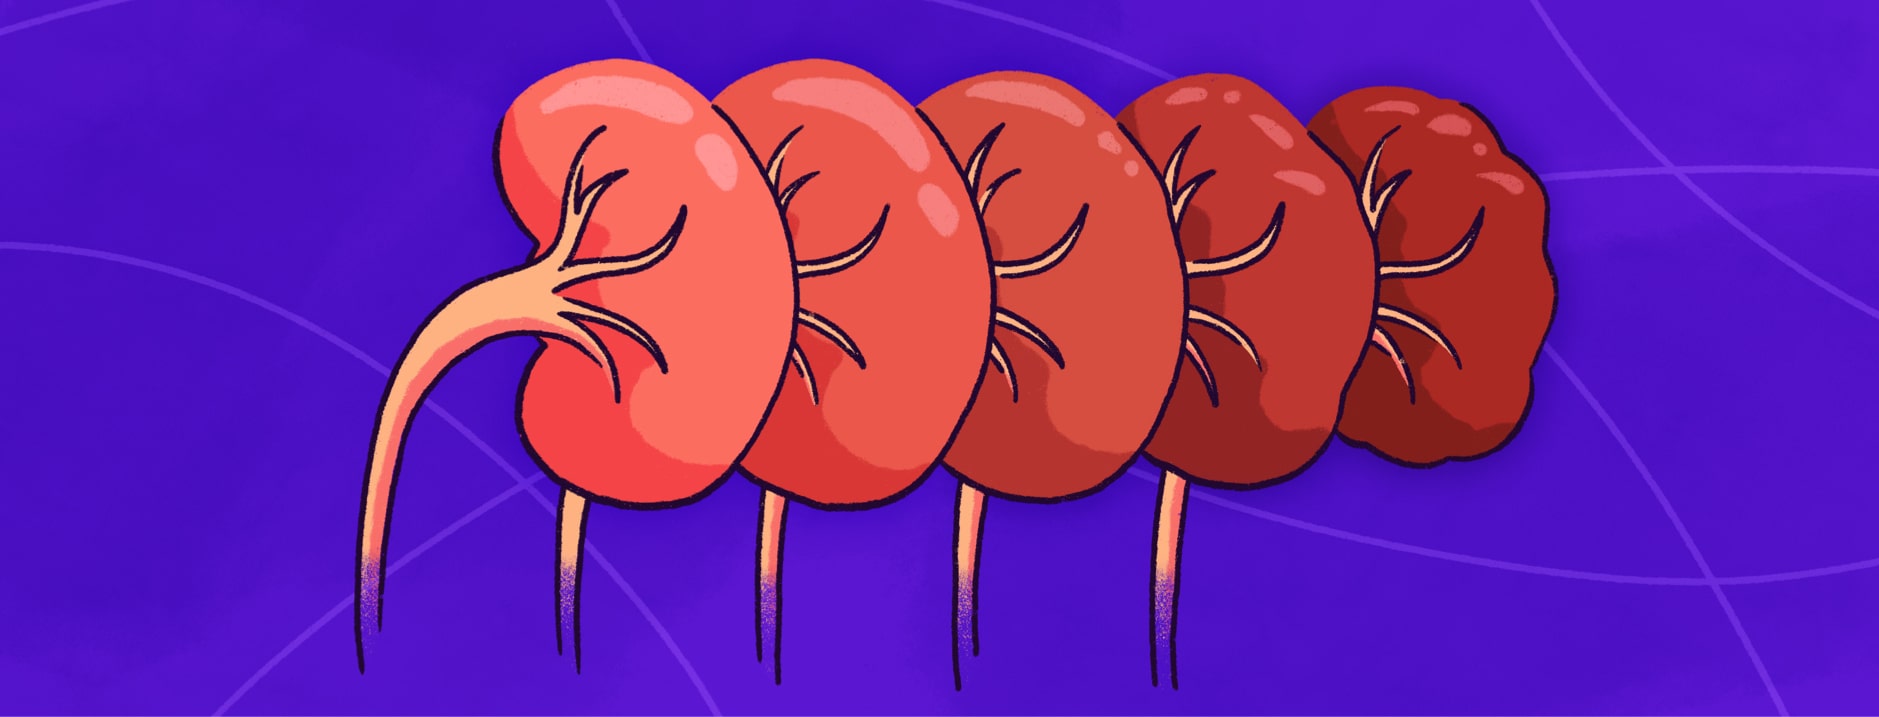 A series of 5 kidneys with progressive deterioration to depict the 5 stages of kidney disease.